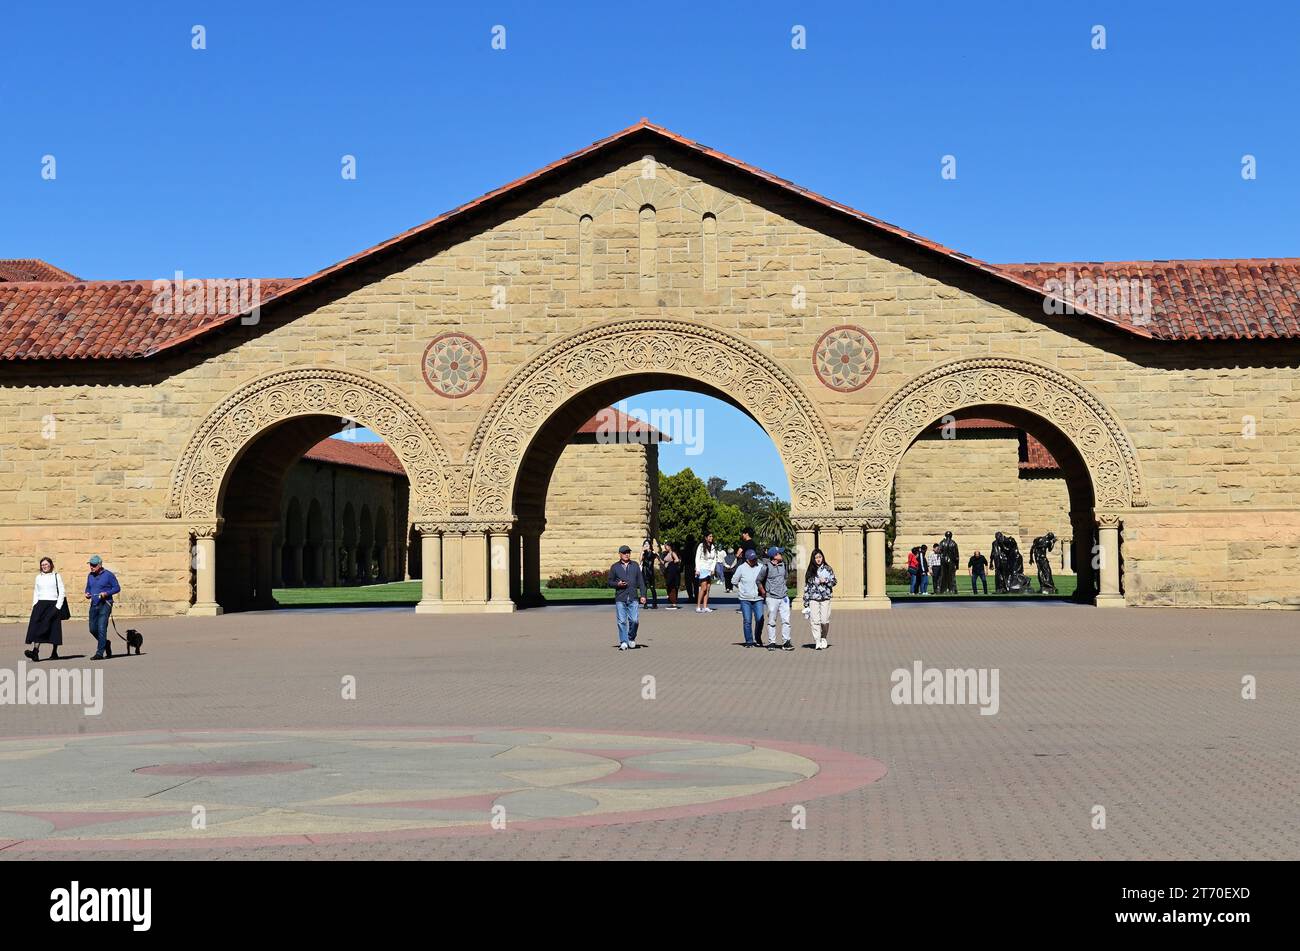 Stanford, California, USA. Beautifully detailed archways provide entry portals to the Main Quad at Stanford University. Stock Photo